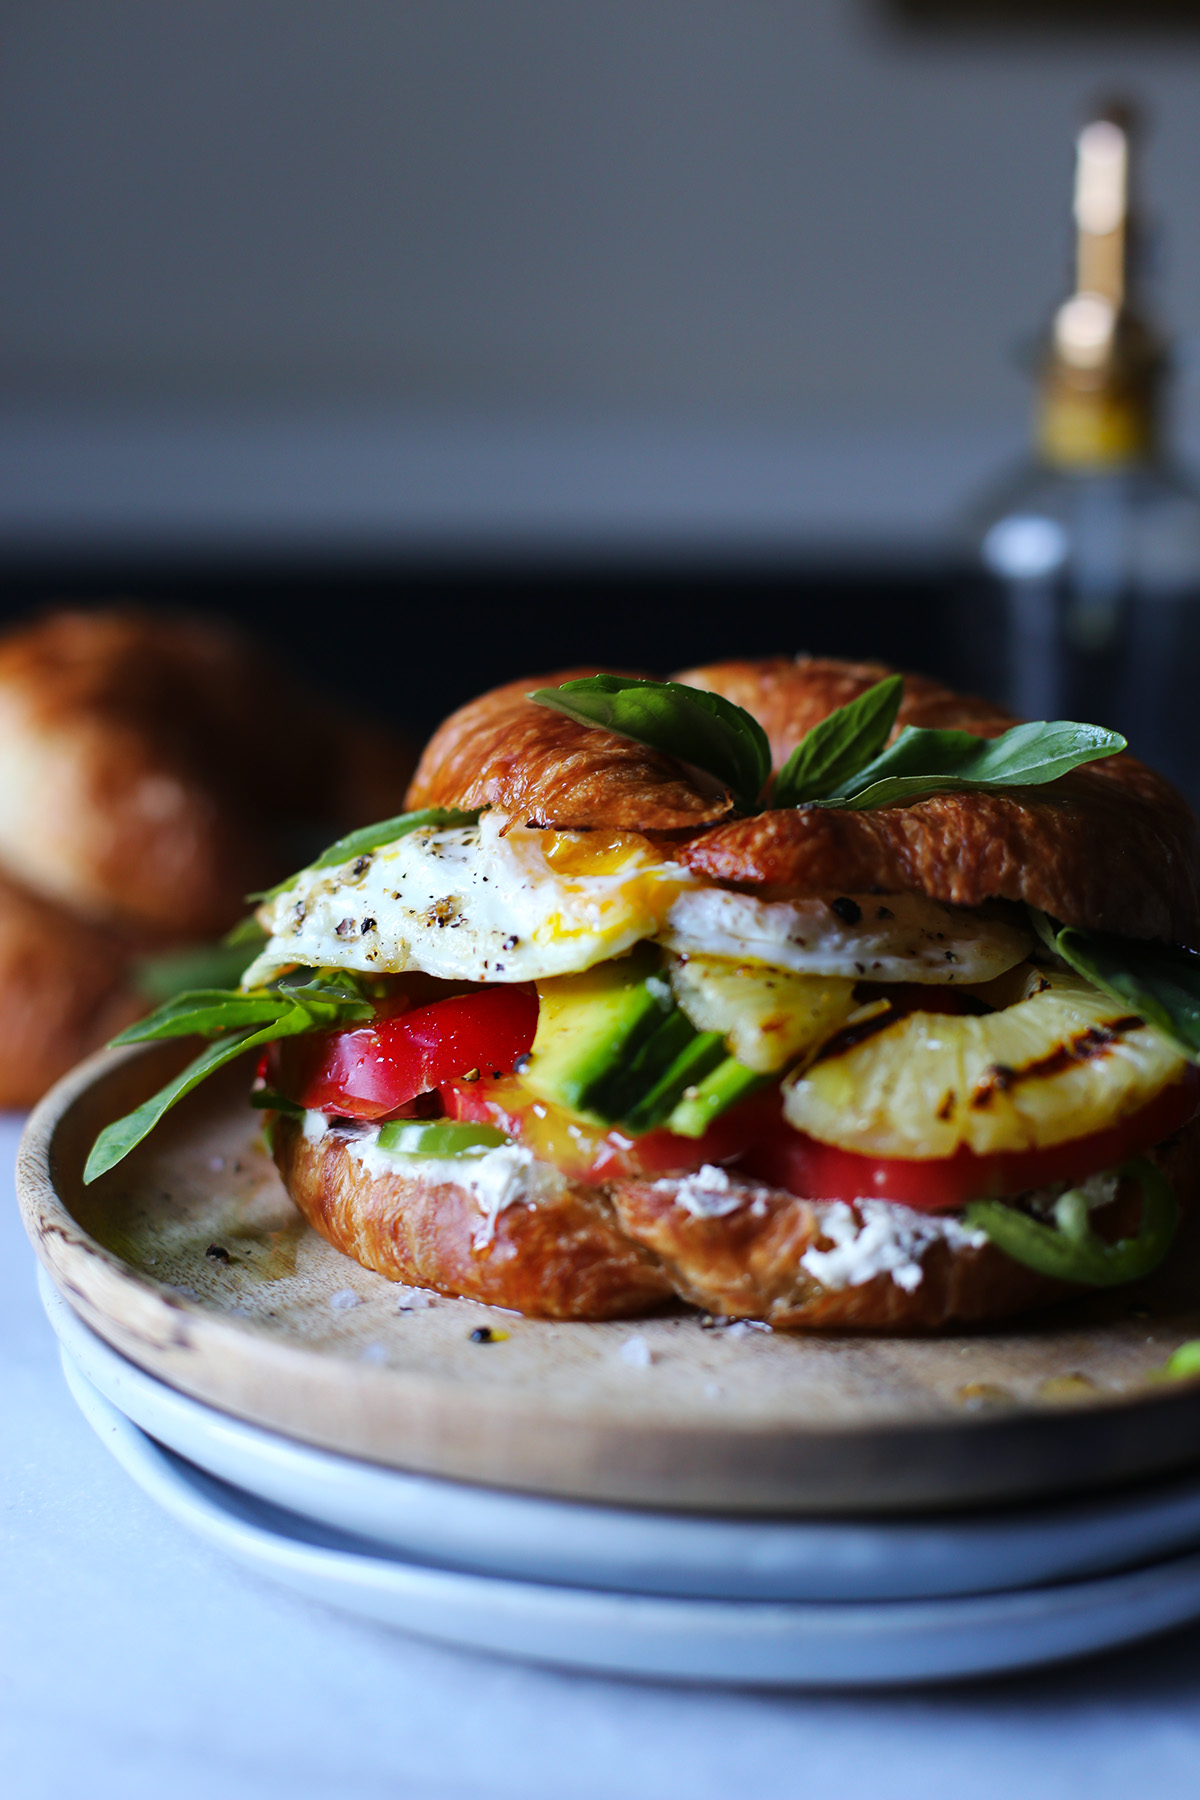 Croissant and fried egg sandwich with avocado and grilled pineapple